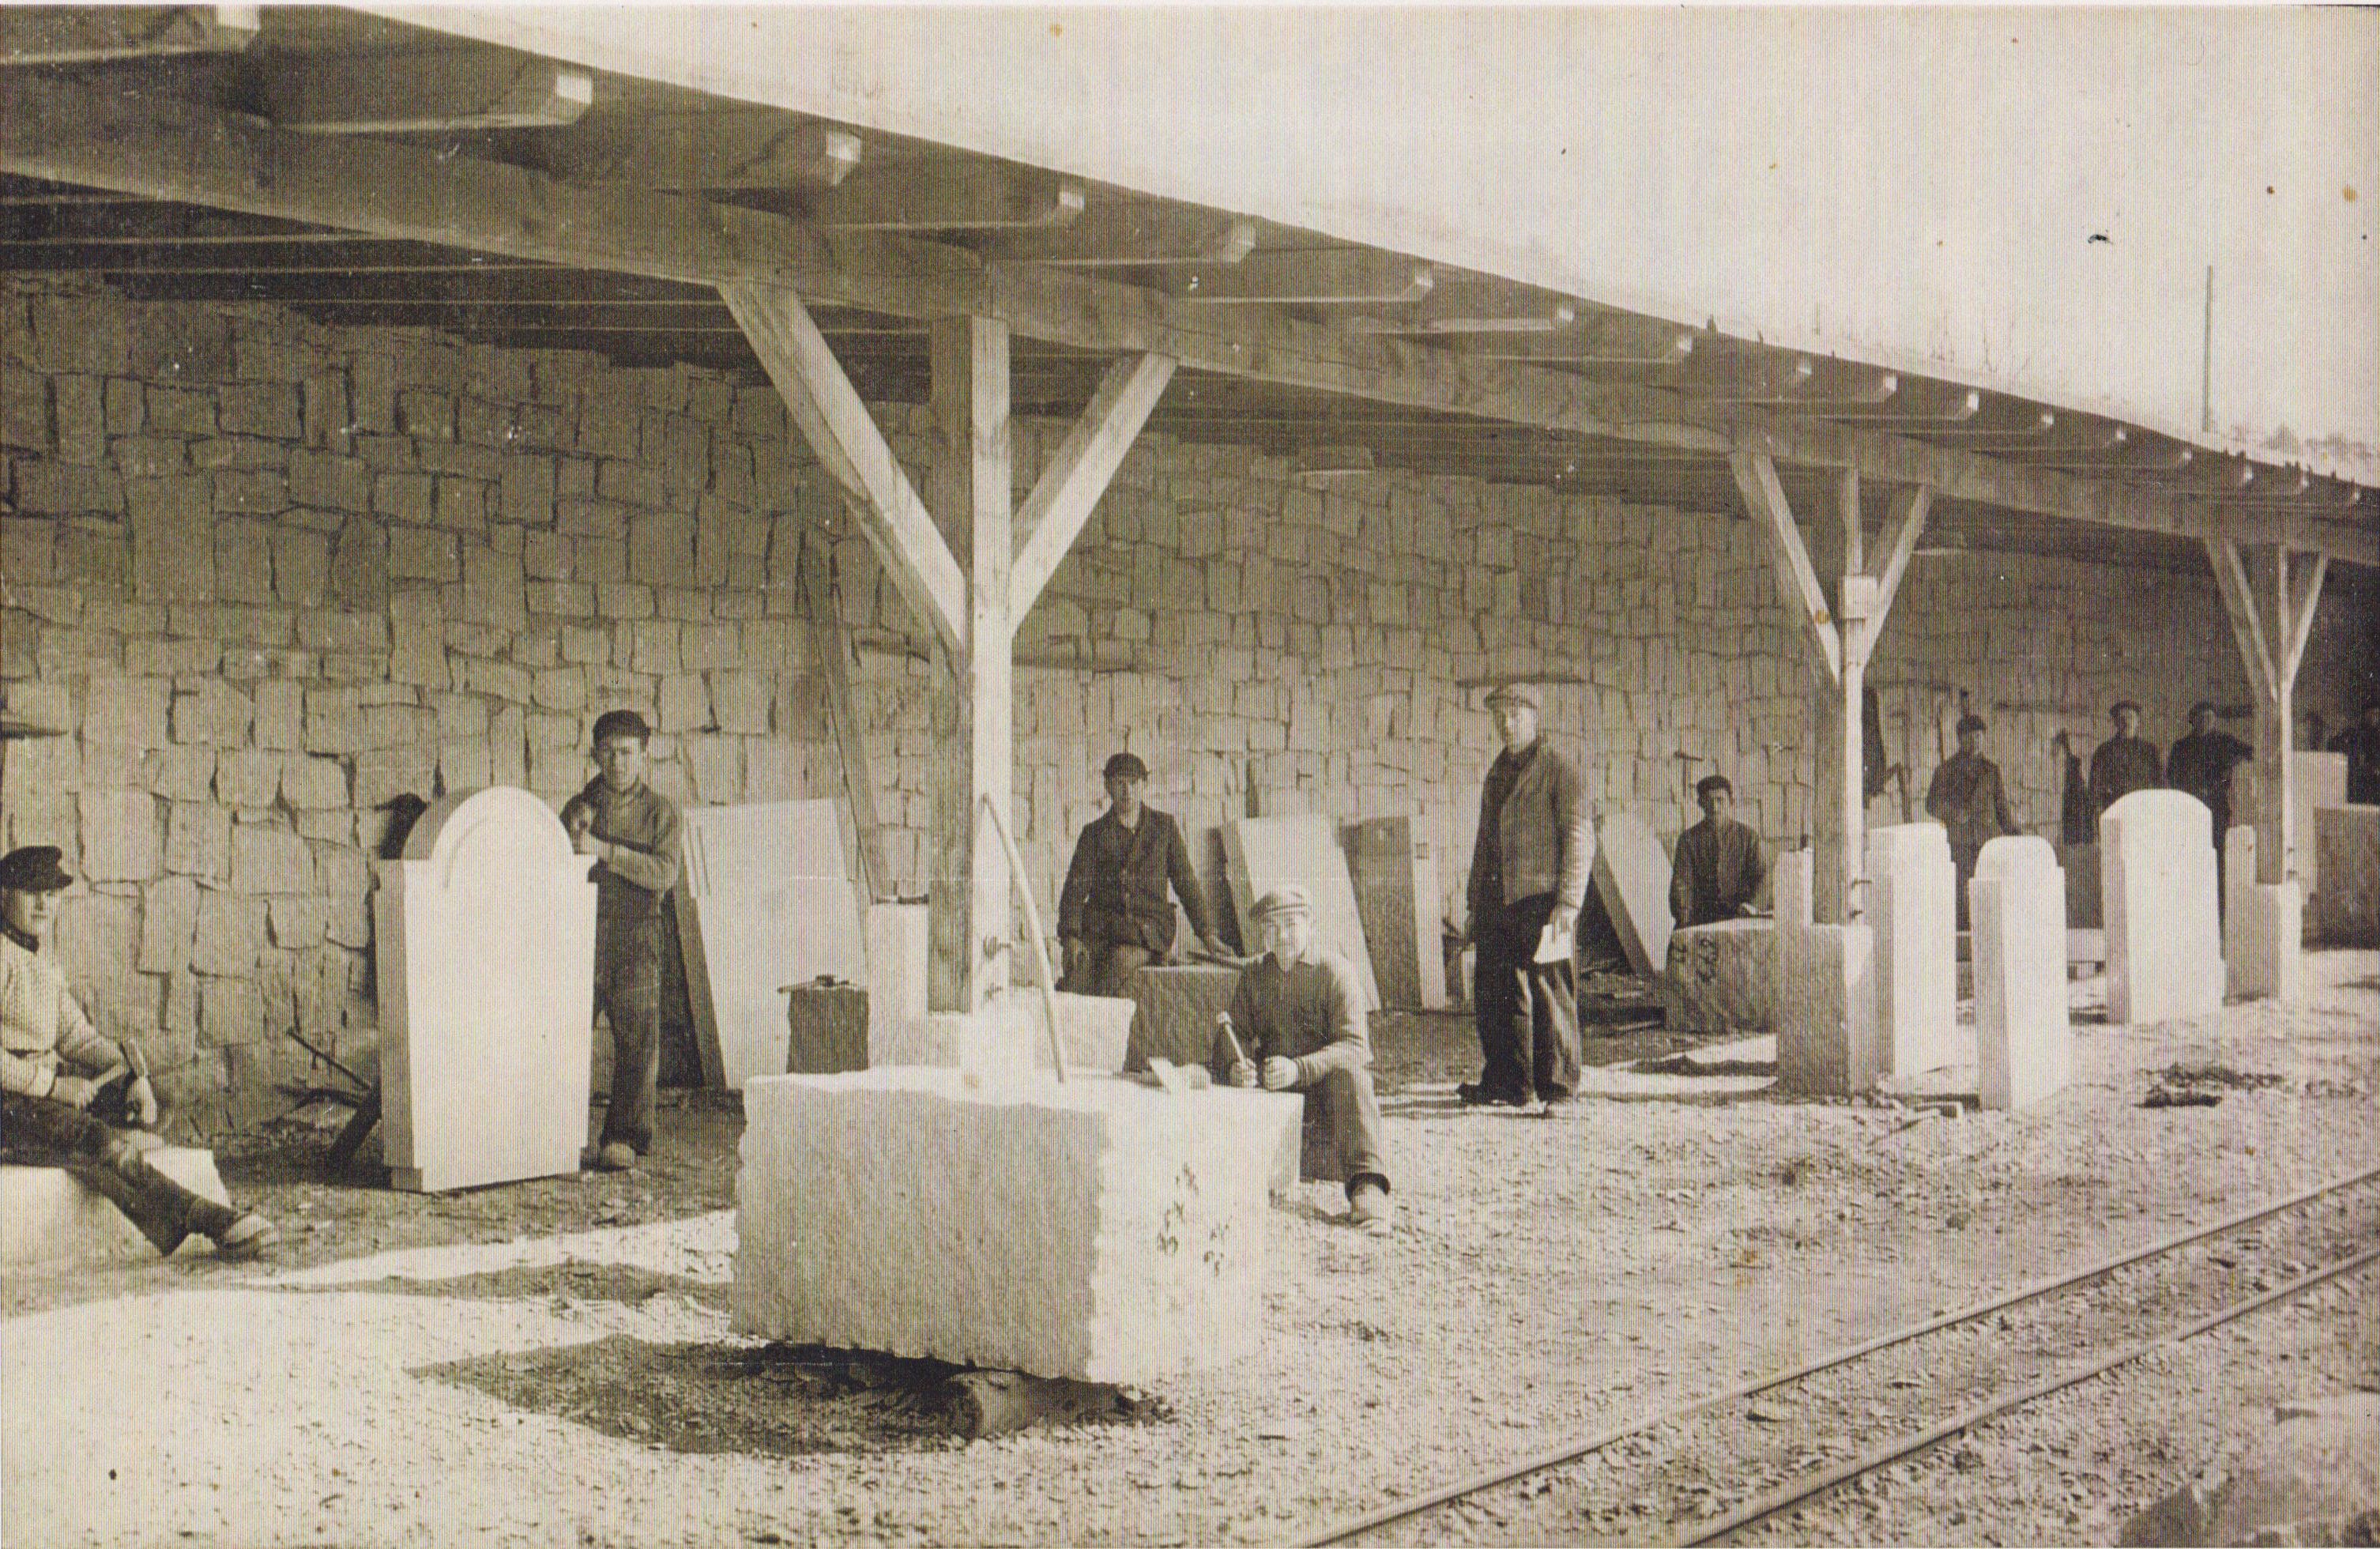 Kurt Pechmann, center, sits in front of a large block of granite in Germany in April 1941. At the time, he was already drafted into the German army, the government said he needed to finish this work first. The stone will become a window sill in Berlin's Bundestag building, said his son, Gerhard Pechmann.